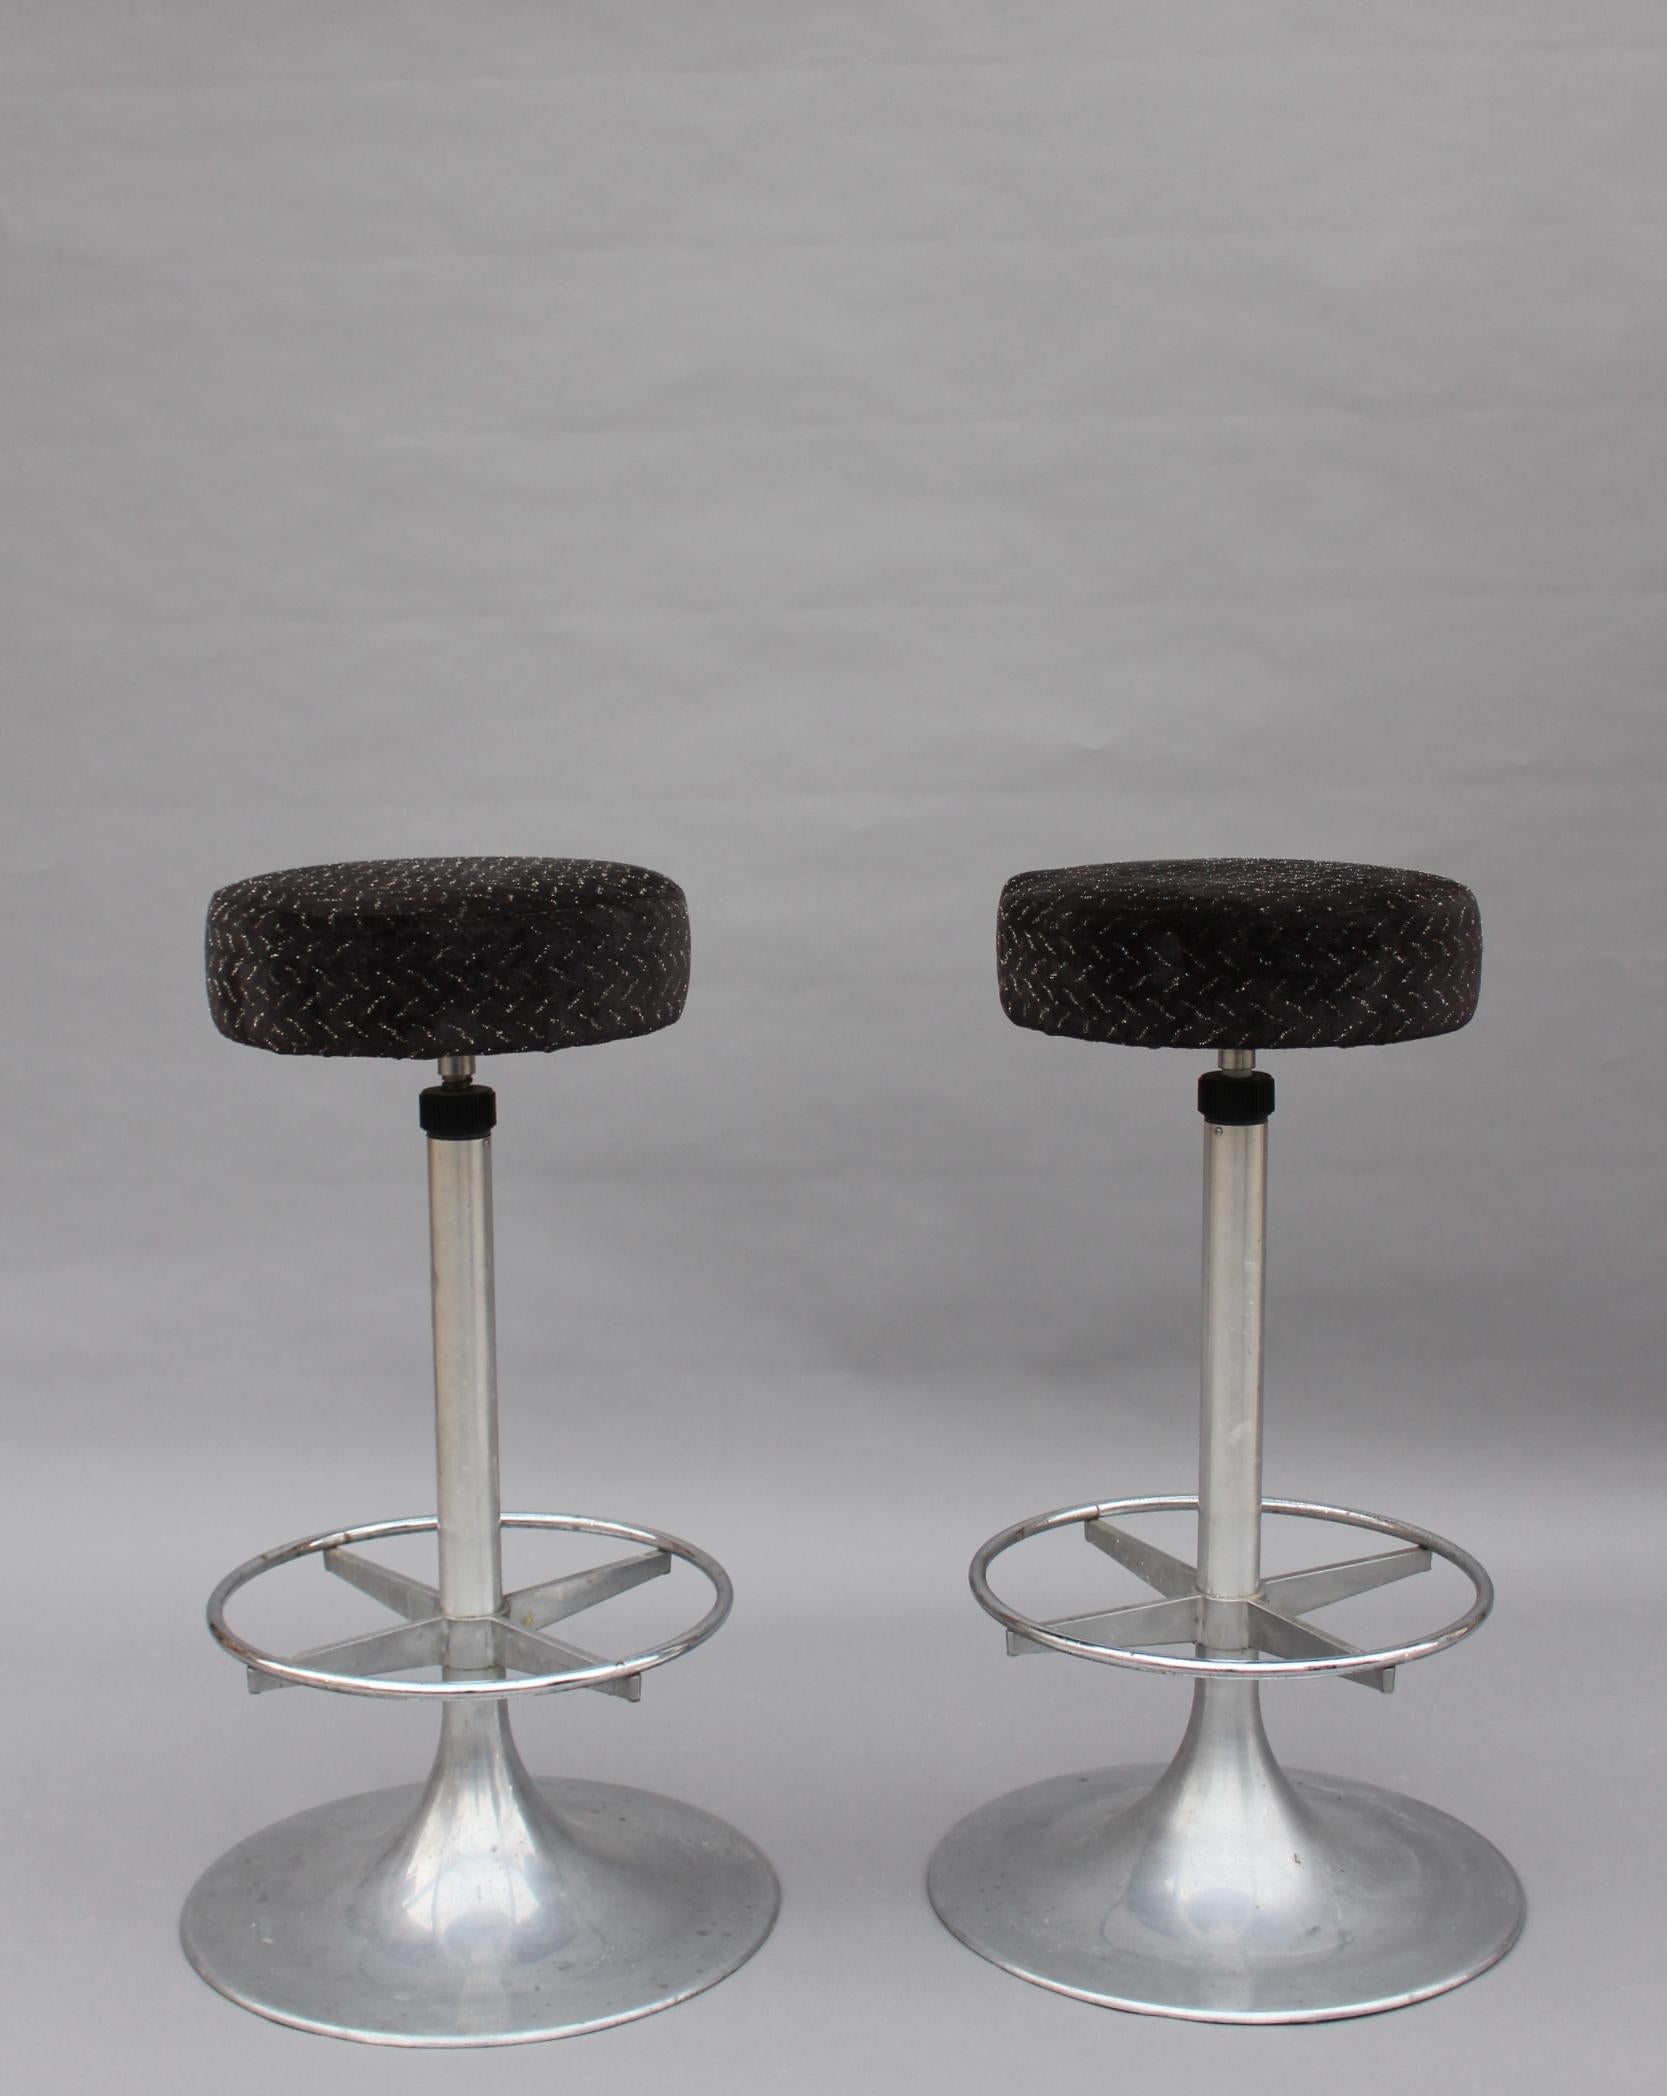 A pair of 1960s cast aluminum bar stools with chrome footrests 
Diameter of seat is 14 1/4